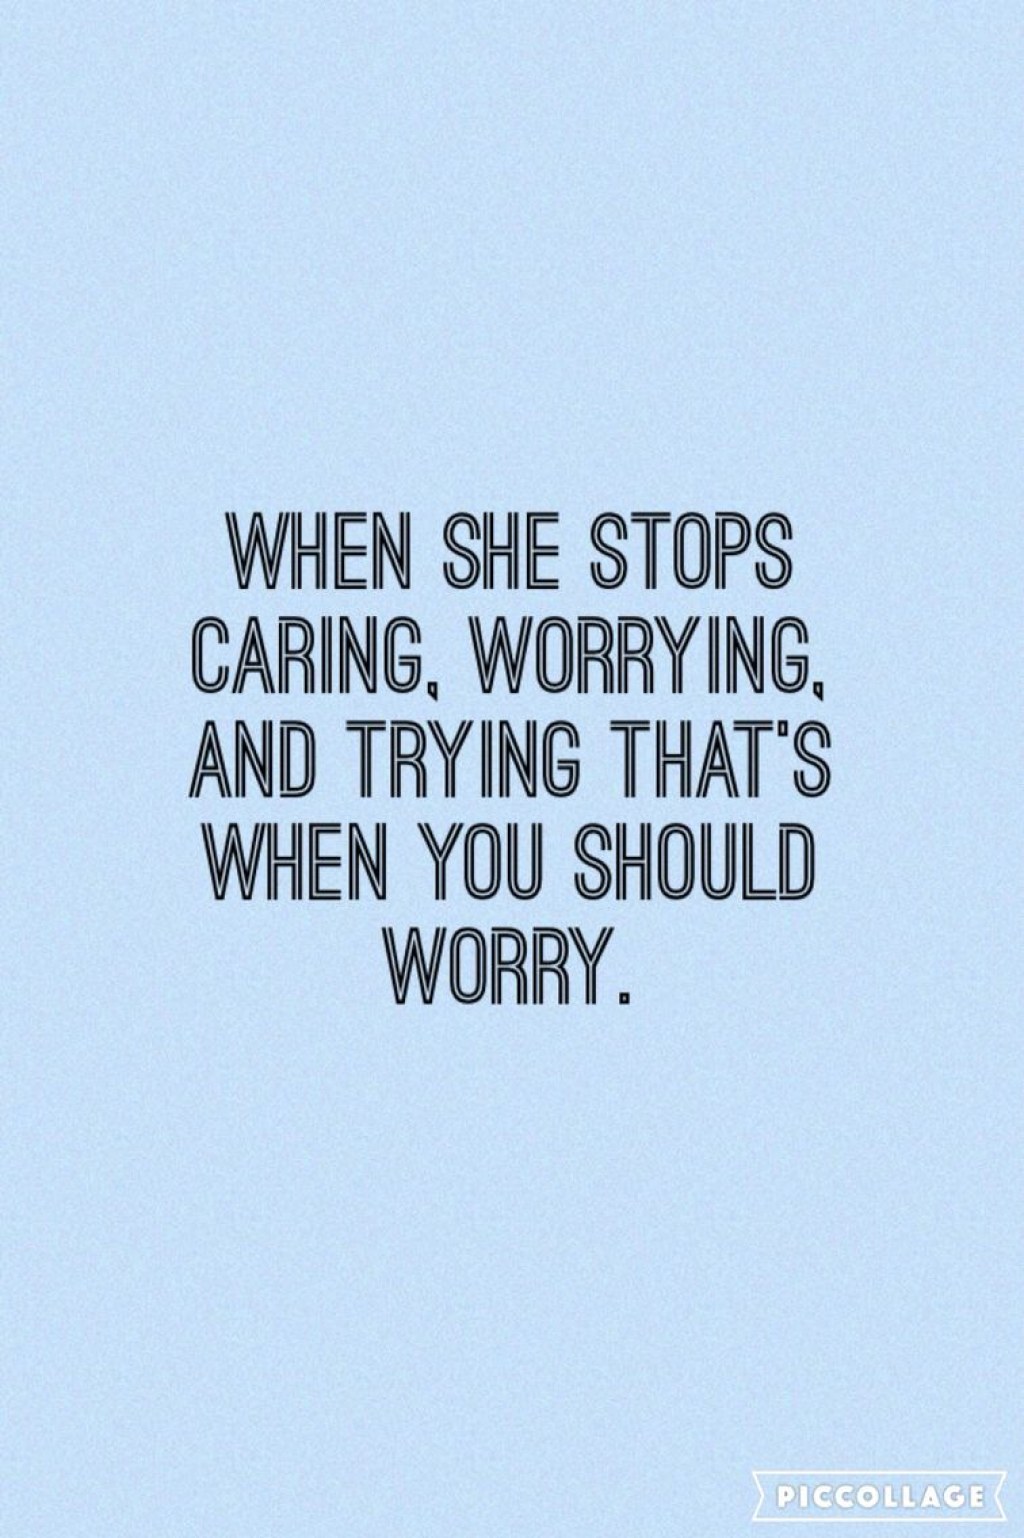 Picture of: When she stops caring, worrying, and trying that’s when you should